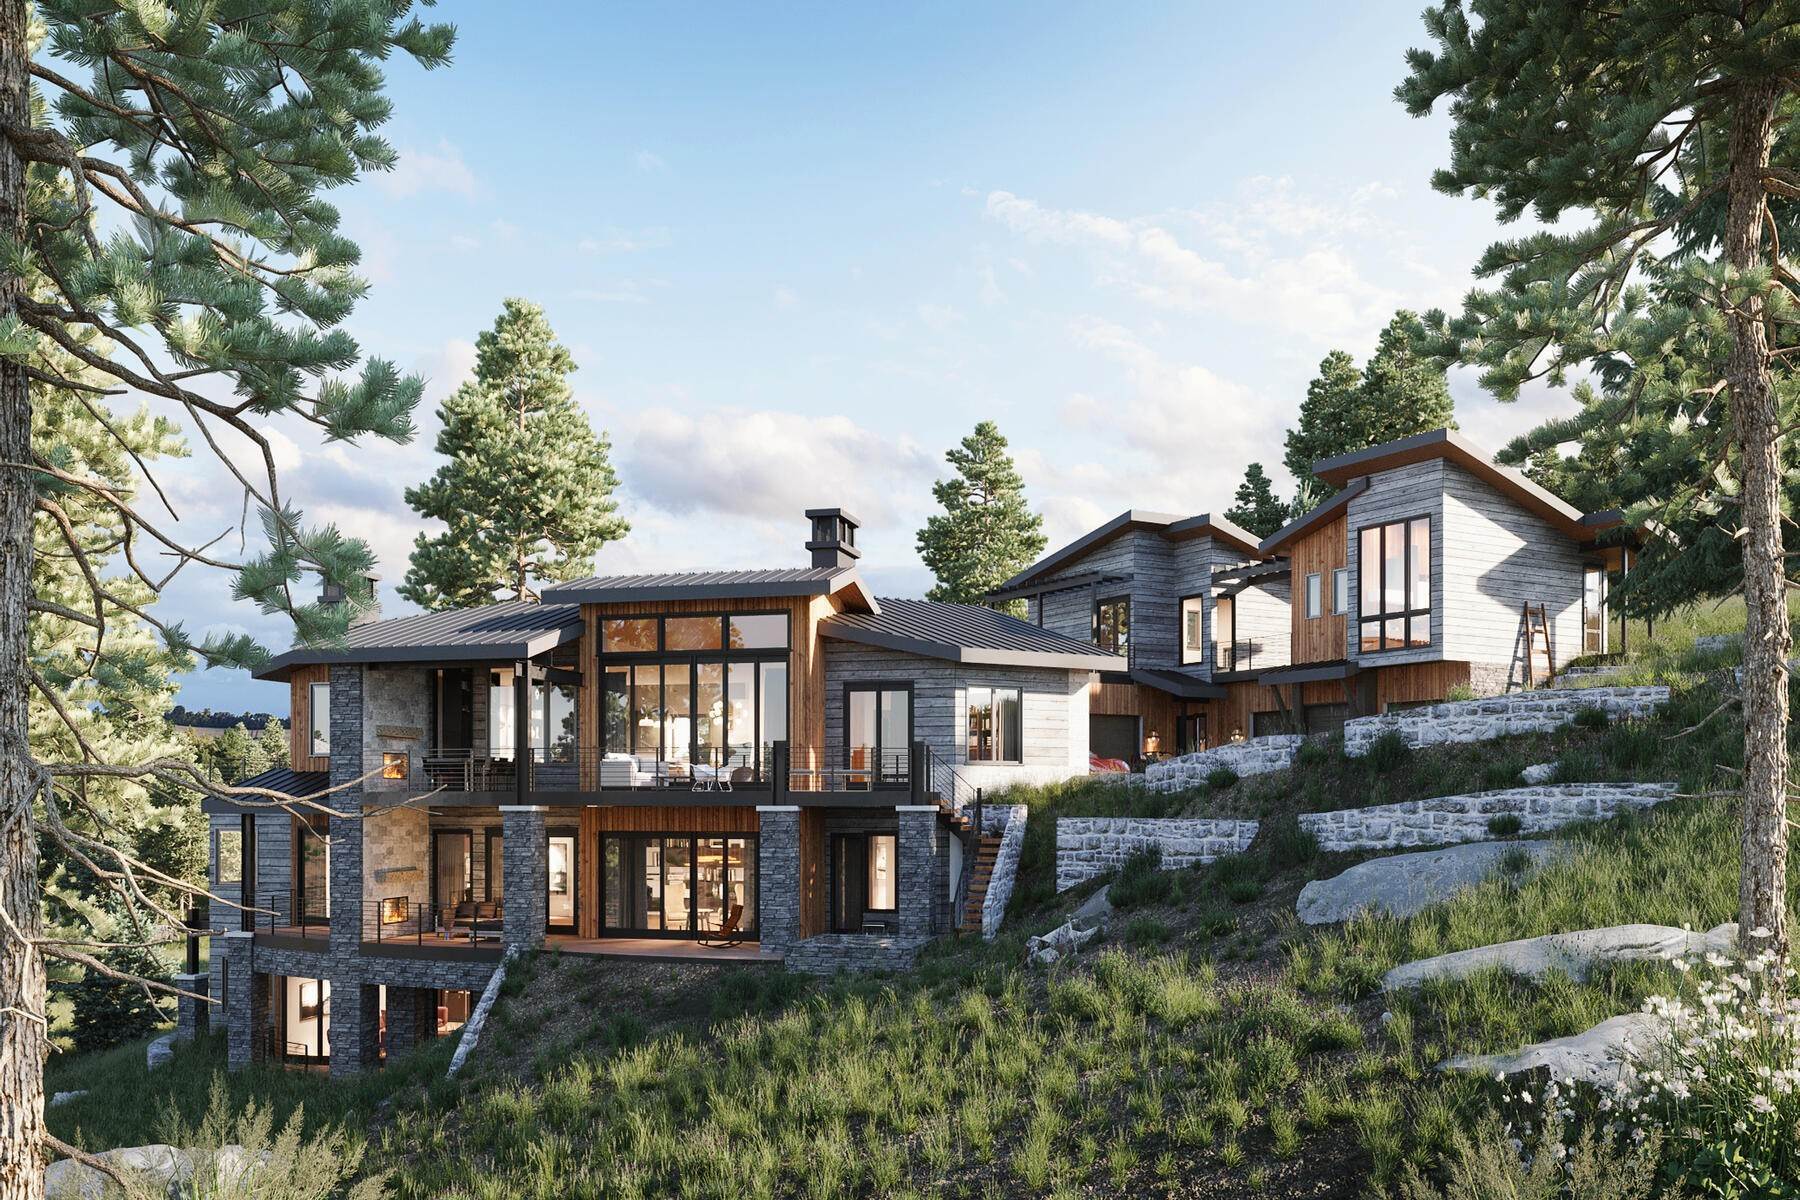 Property for Sale at Stunning Design Merged With Elevated Mountain Views Overlooking Promontory 9319 Golden Spike Ct Park City, Utah 84098 United States